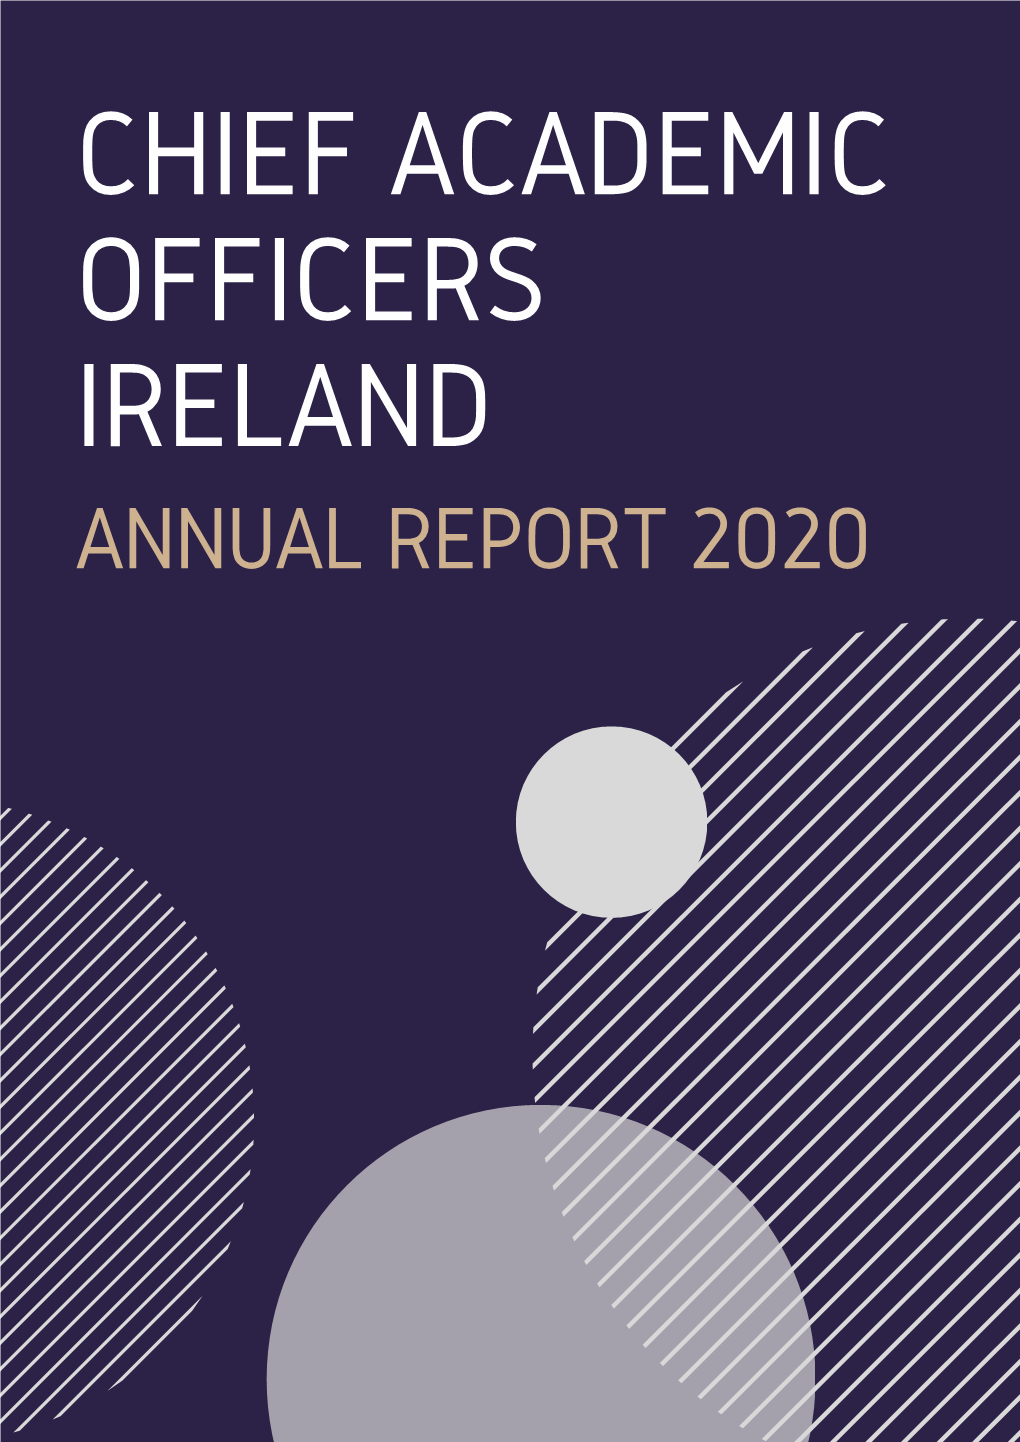 Chief Academic Officers Annual Report 2020